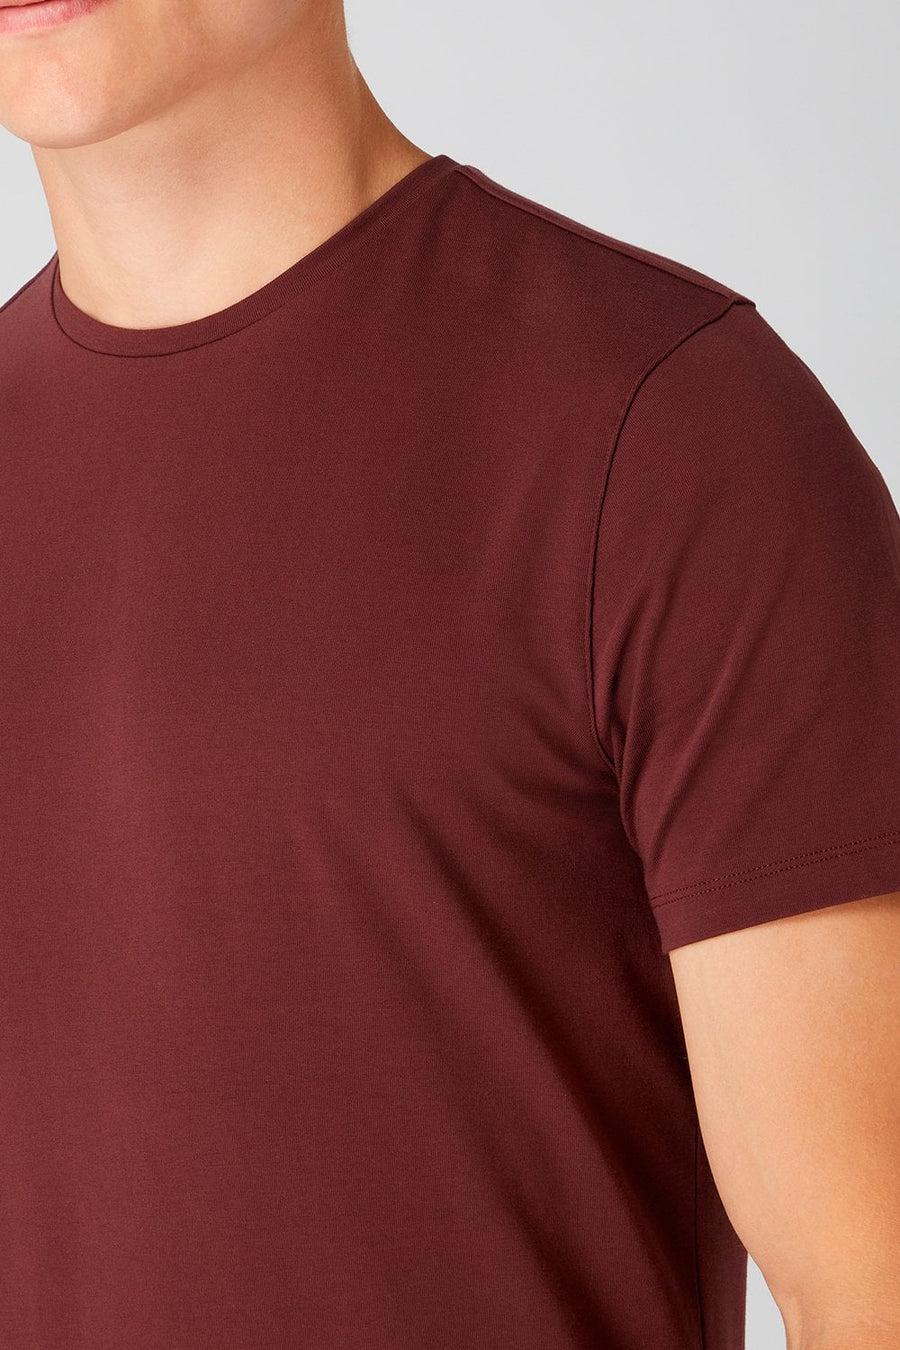 Buy the Remus Uomo Basic Round Neck T-Shirt in Burgundy at Intro. Spend £50 for free UK delivery. Official stockists. We ship worldwide.